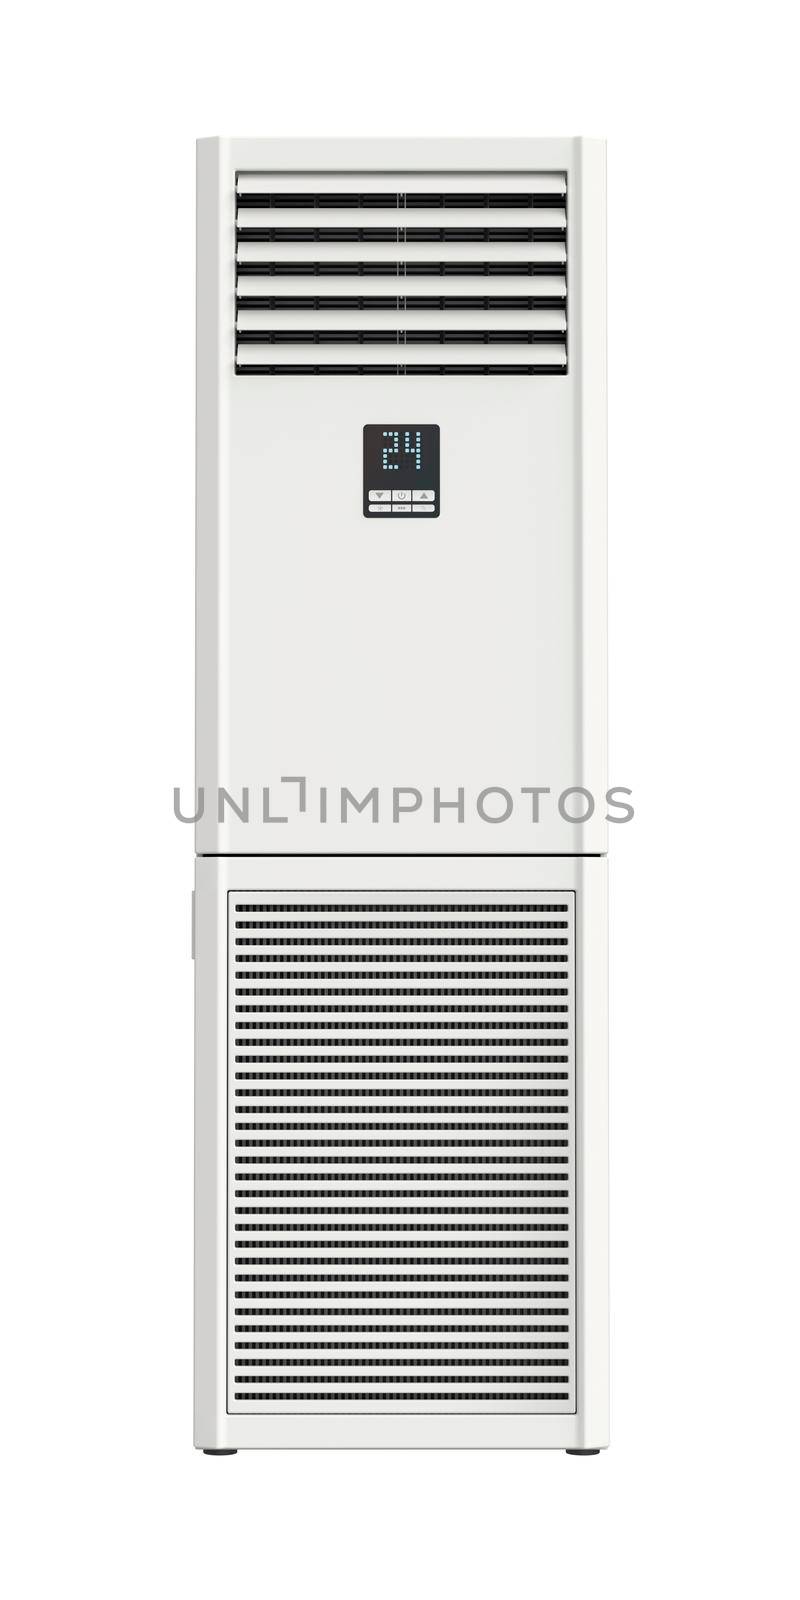 Floor standing air conditioner isolated on white background, front view